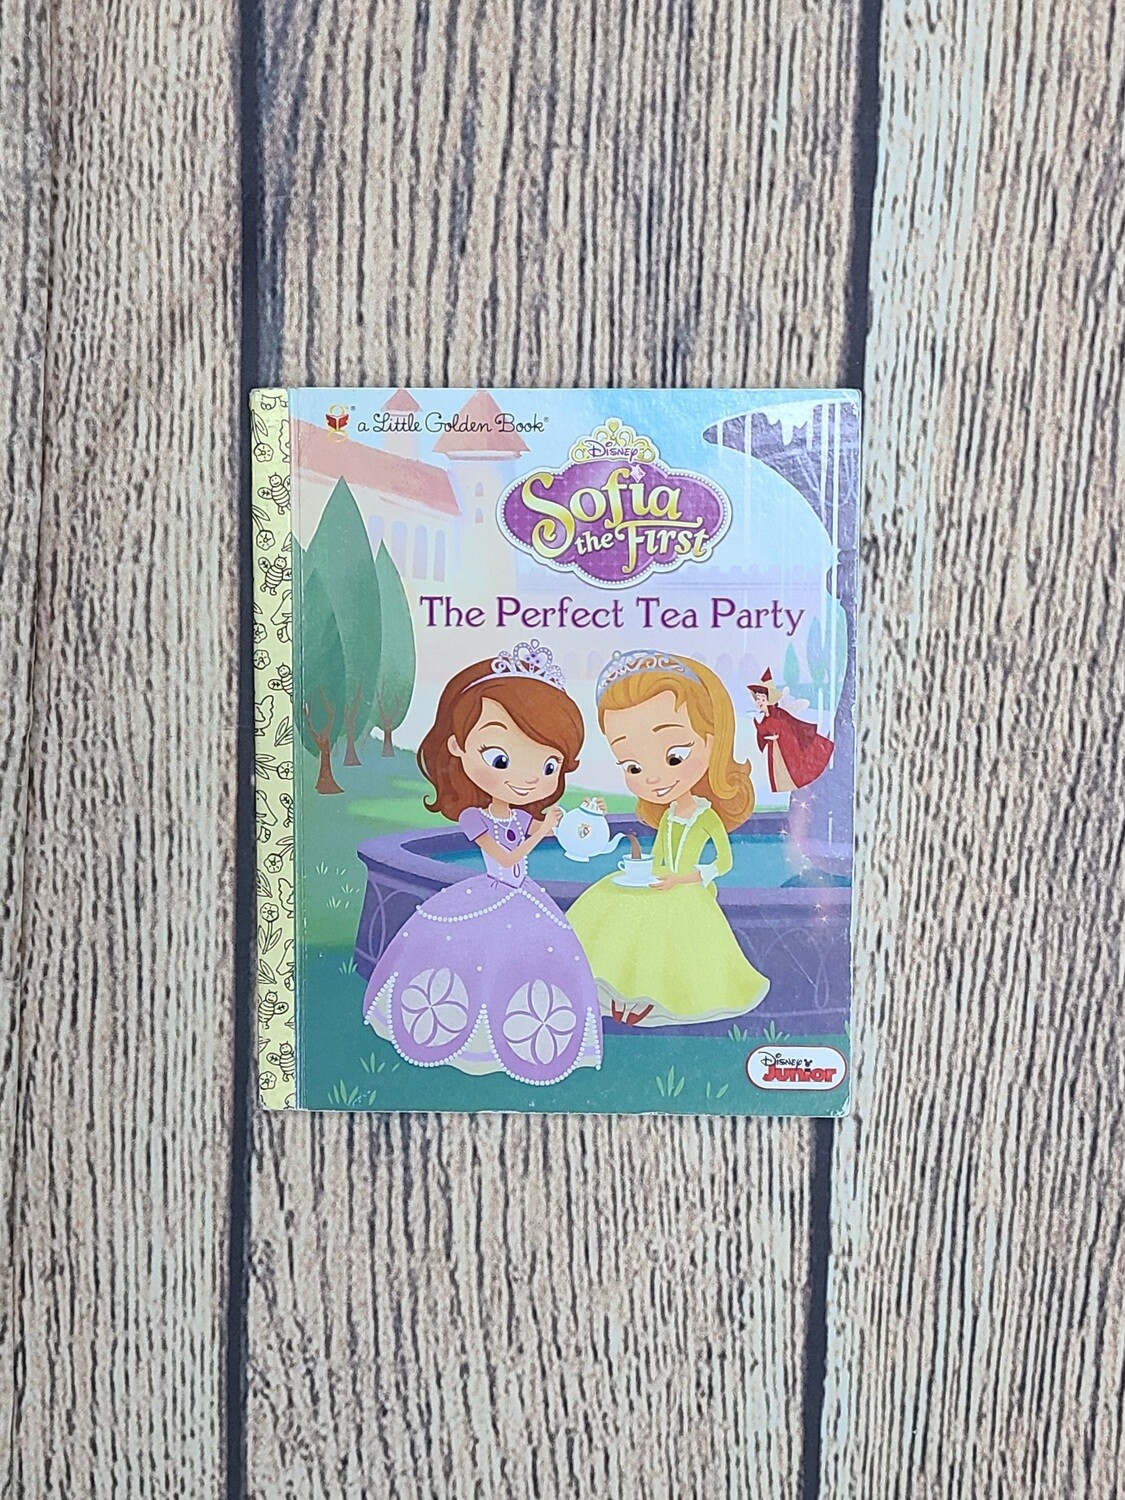 Sofia the First: The Perfect Tea Party adapted by Andrea Posner-Sanchez and Illustrated by Grace Lee - Hardback - Good Condition